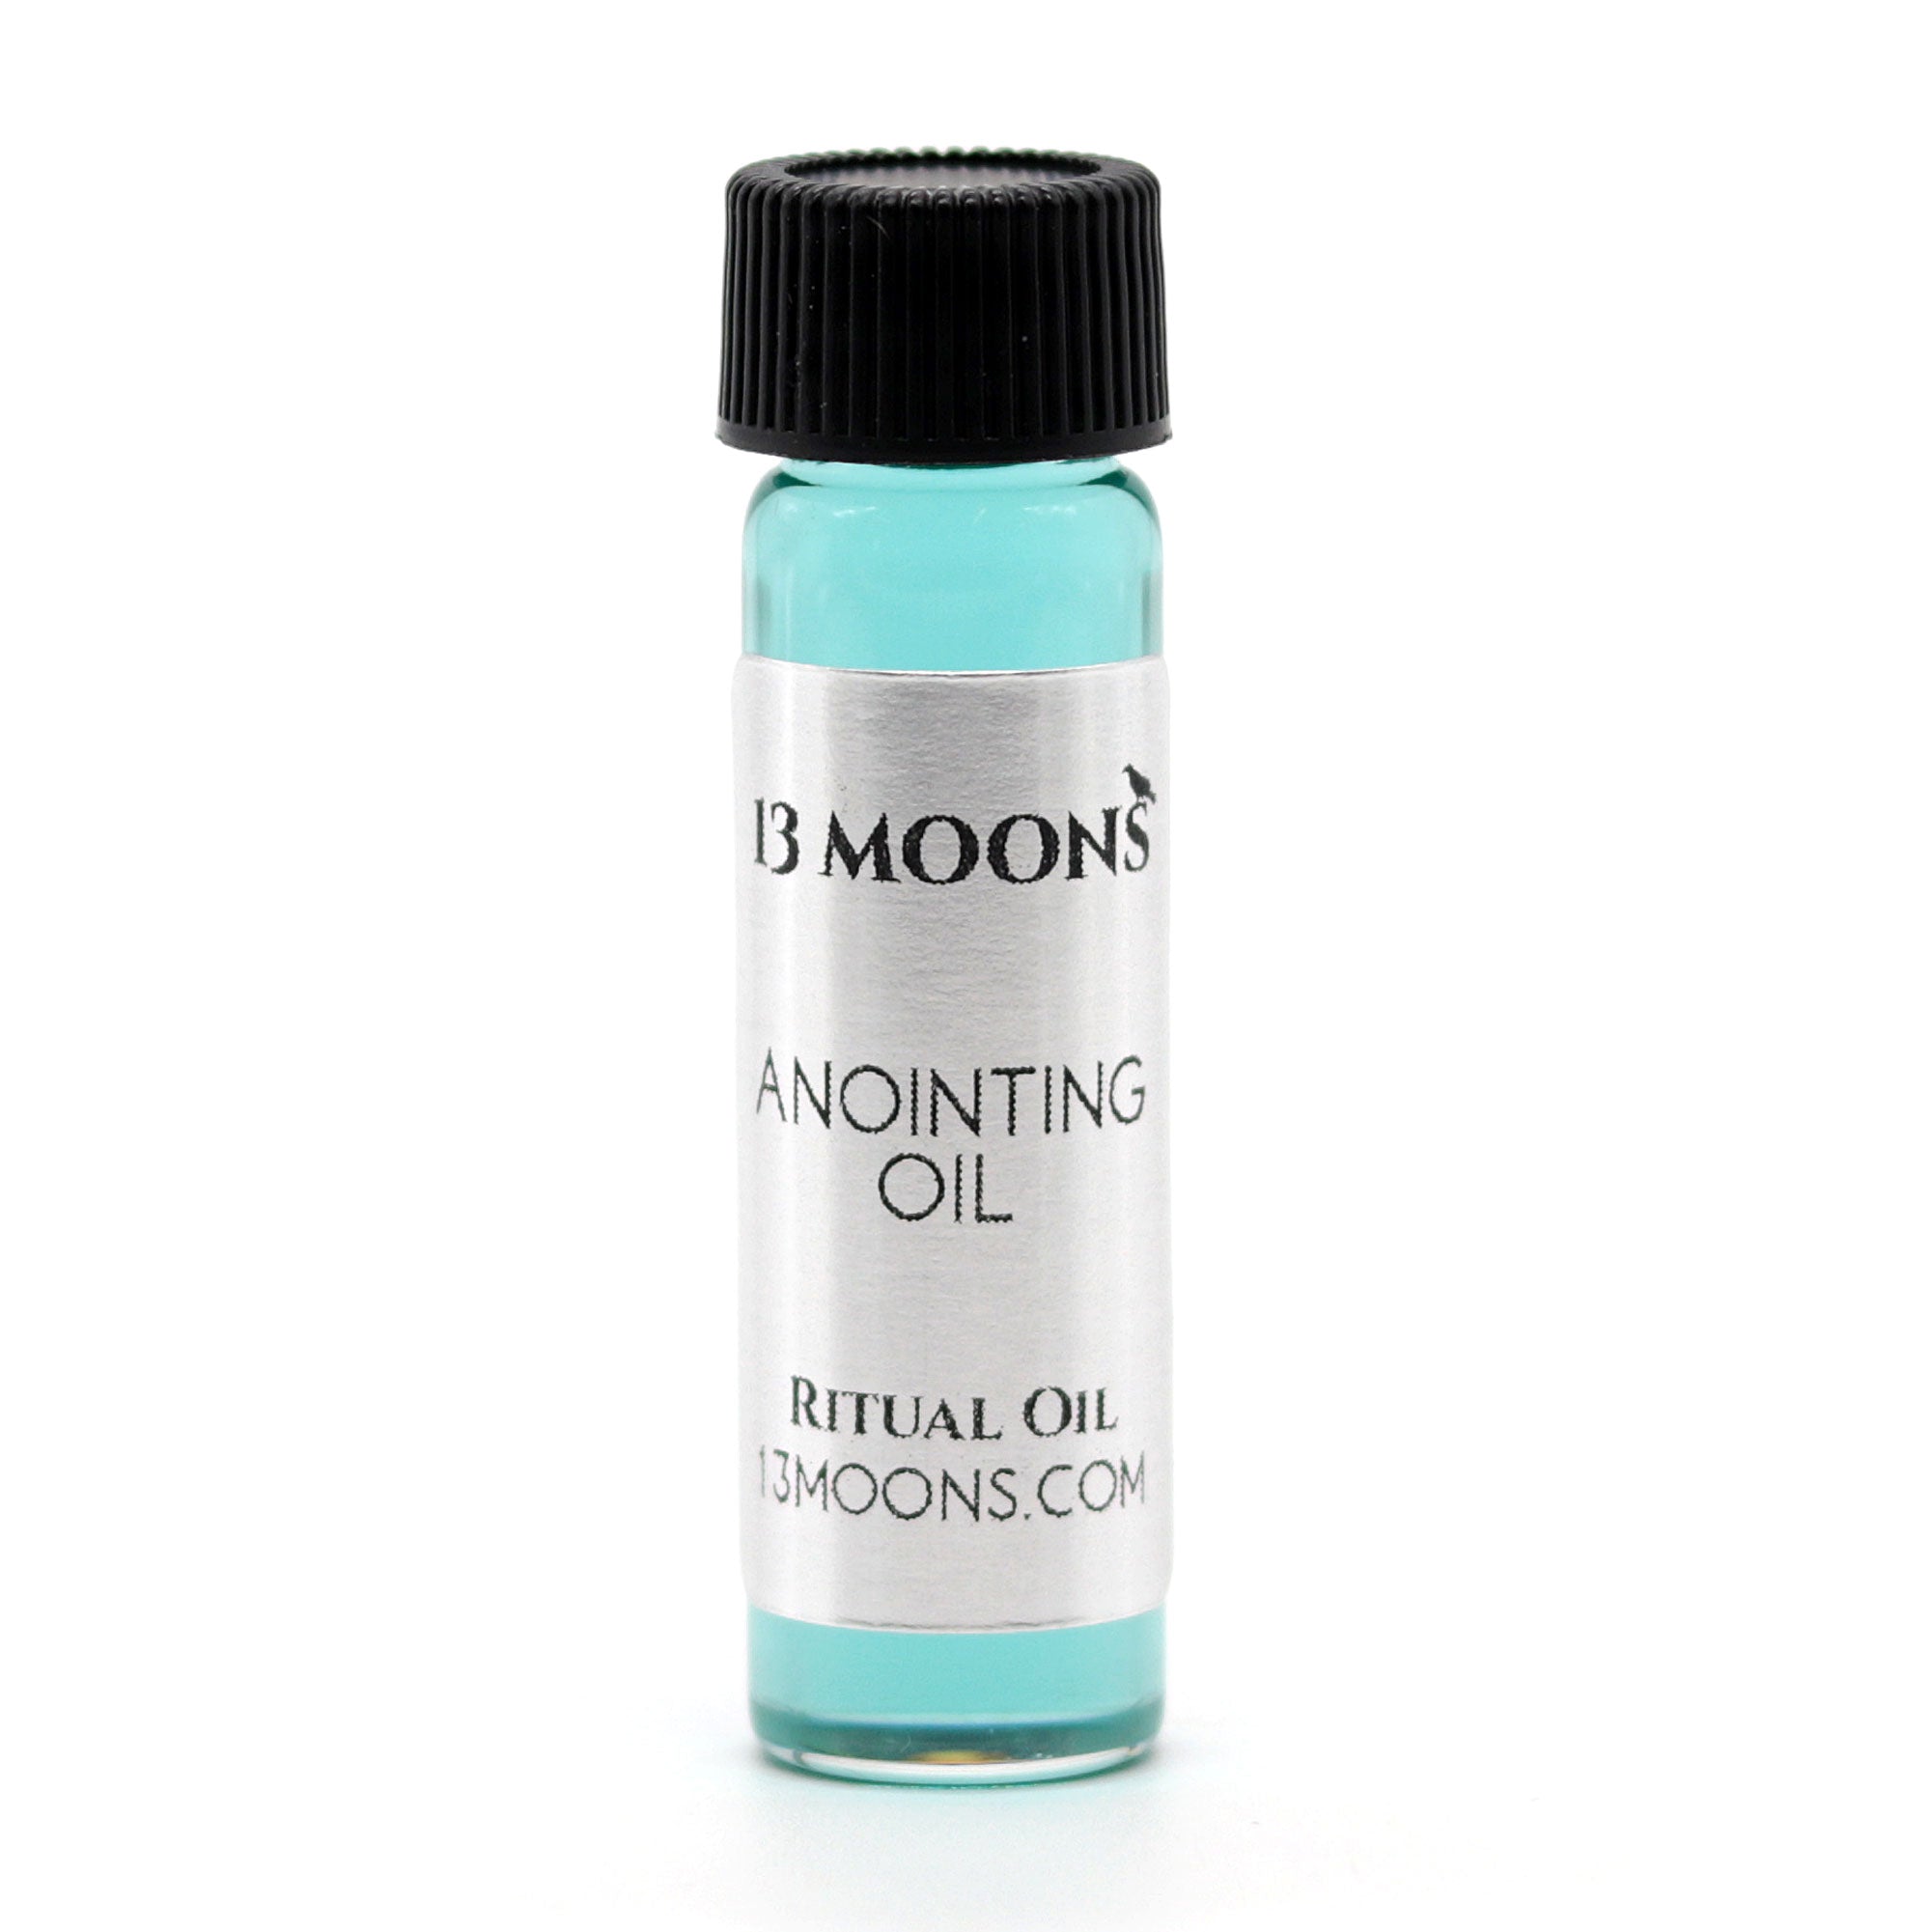 Anointing Oil by 13 Moons - 13 Moons